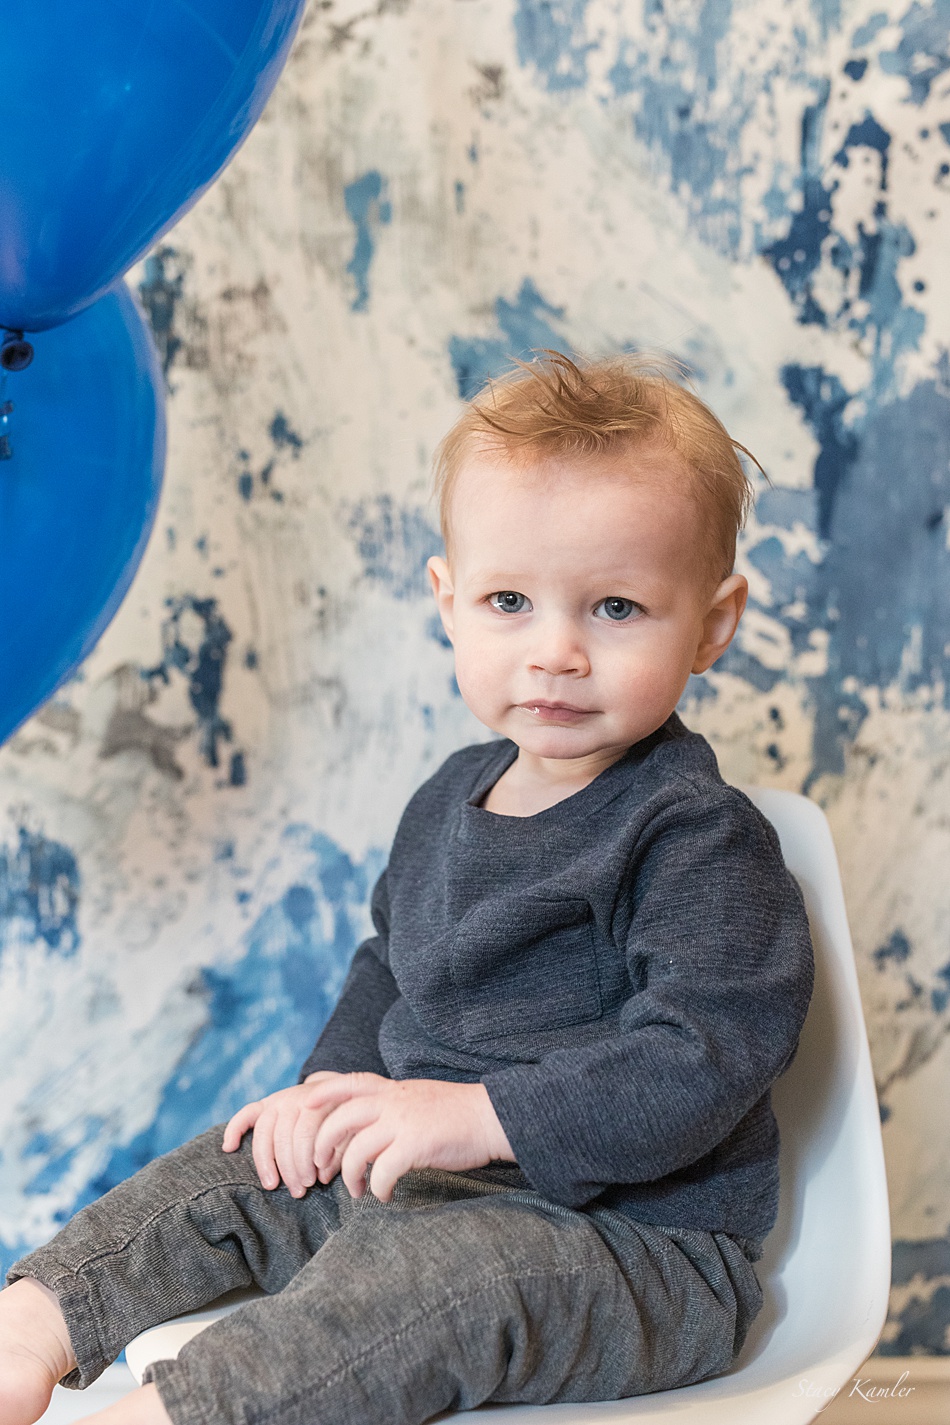 One year old with balloons